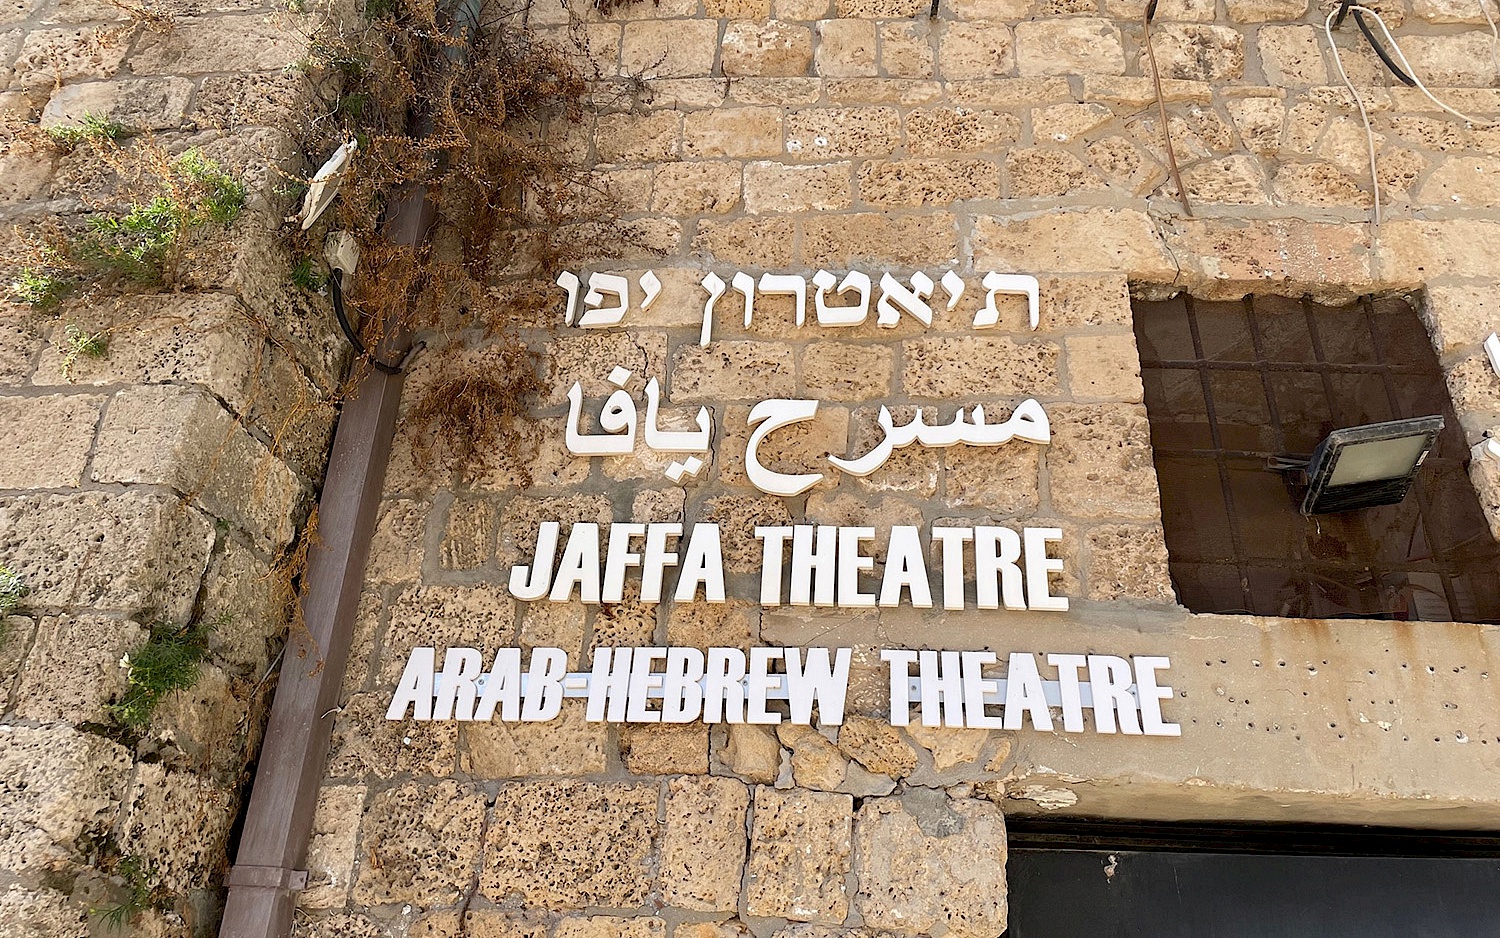 Façade of the Jaffa Theatre, on which the name of the theater is written in Hebrew, Arabic and Roman characters.